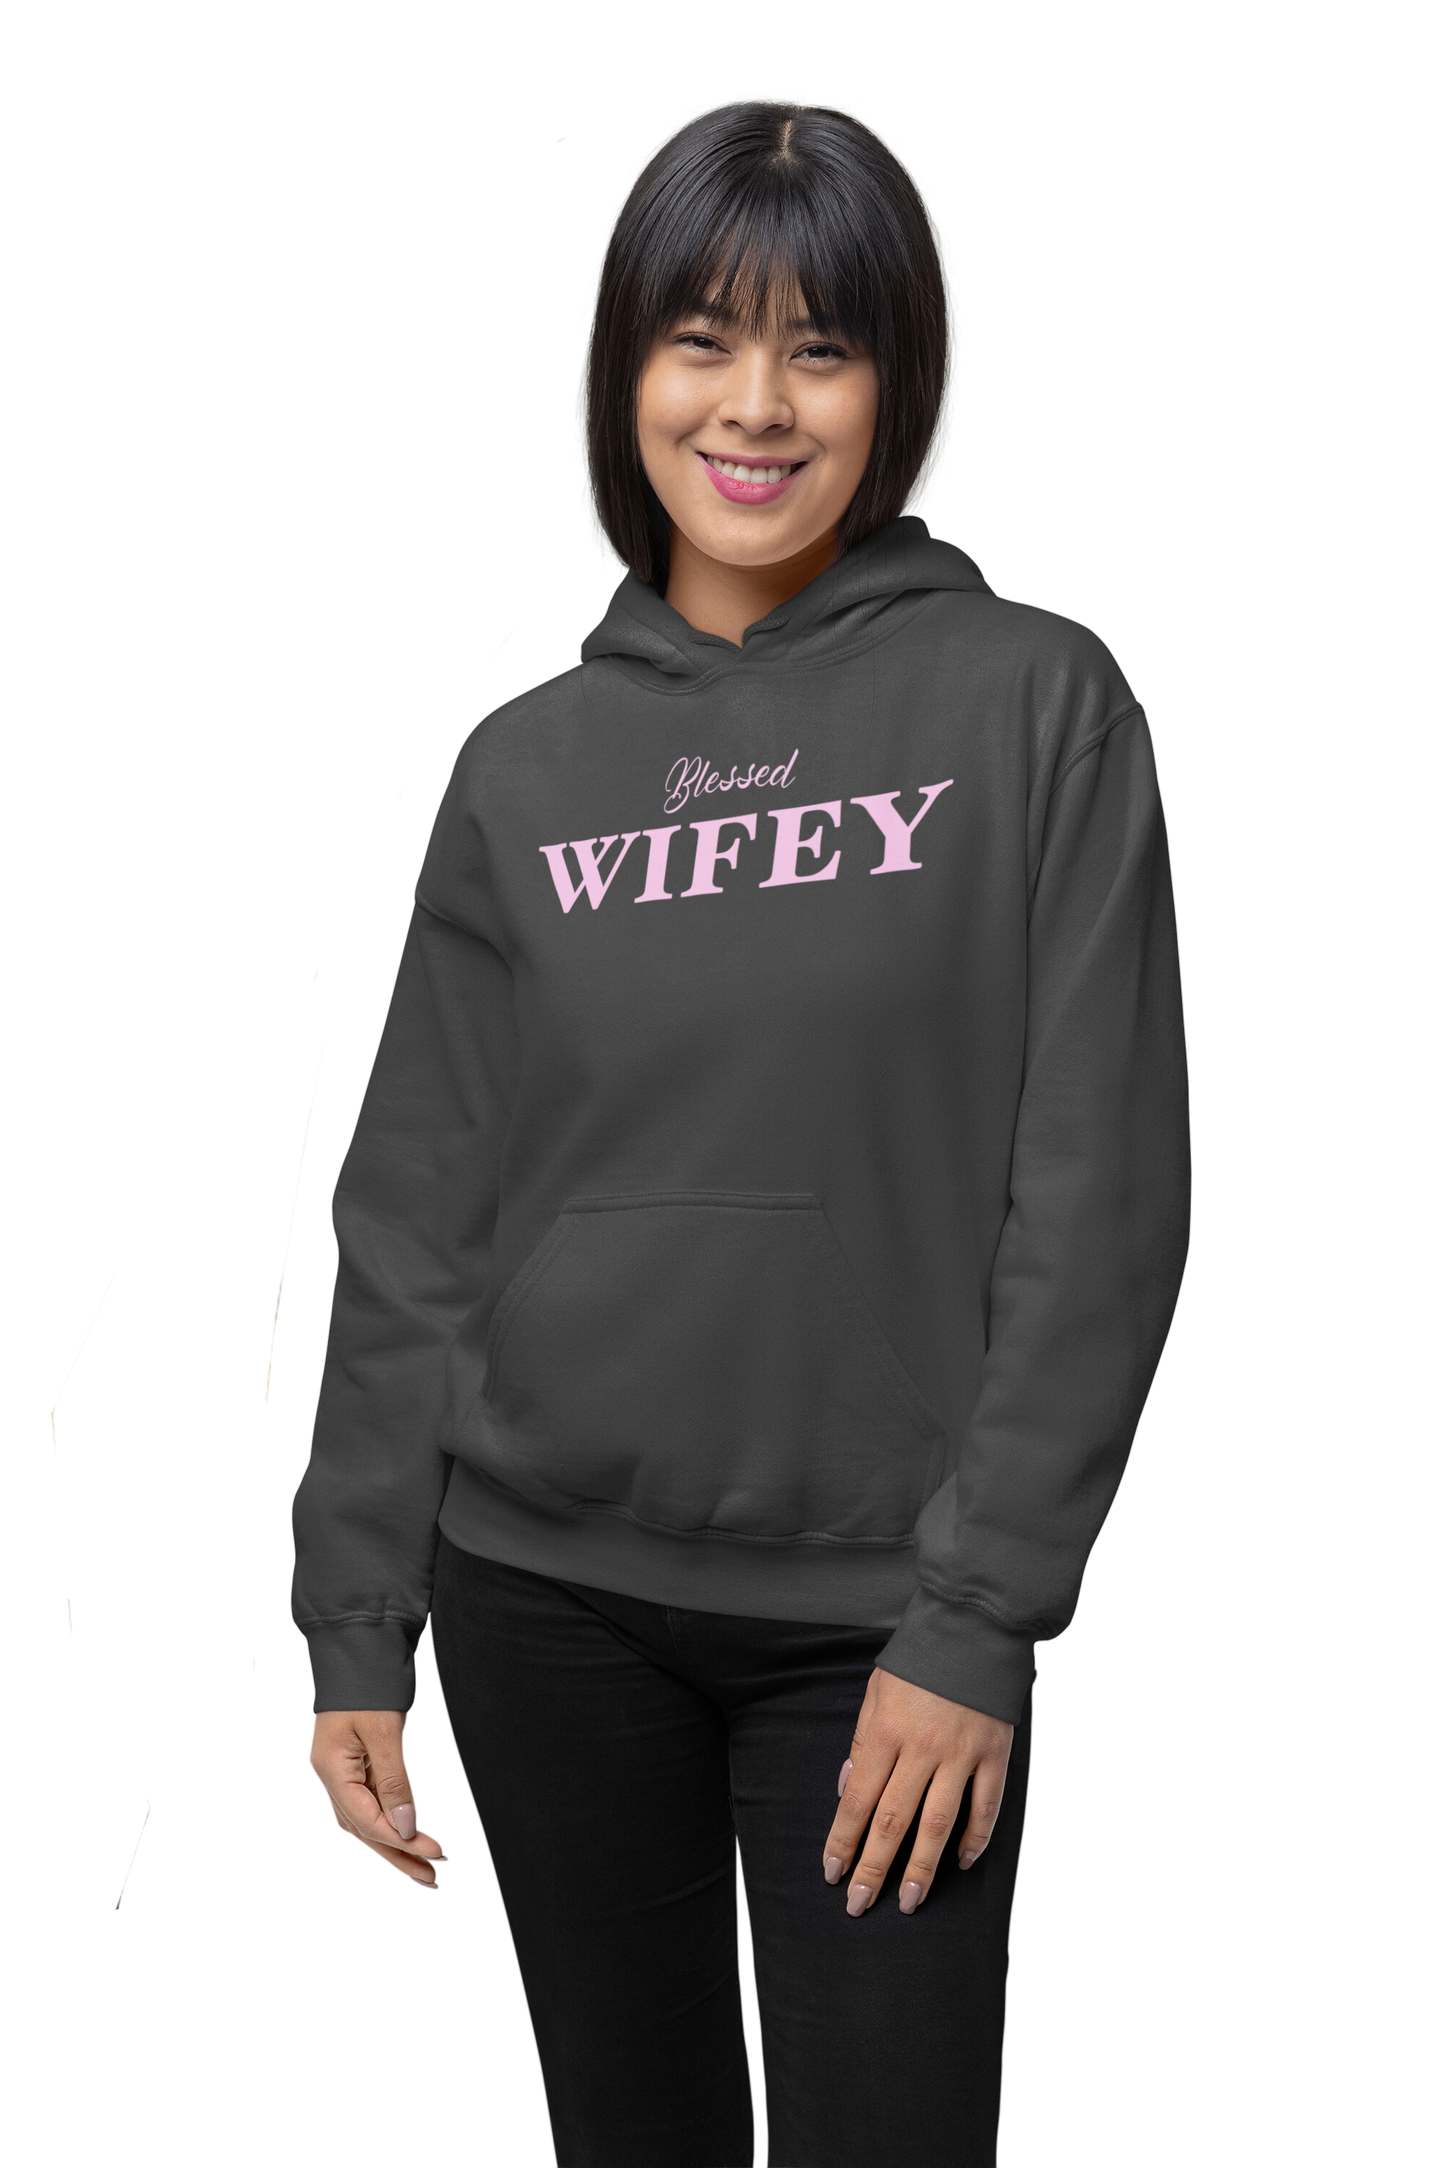 Wifey-Hooded Sweatshirt (Available in more colors)